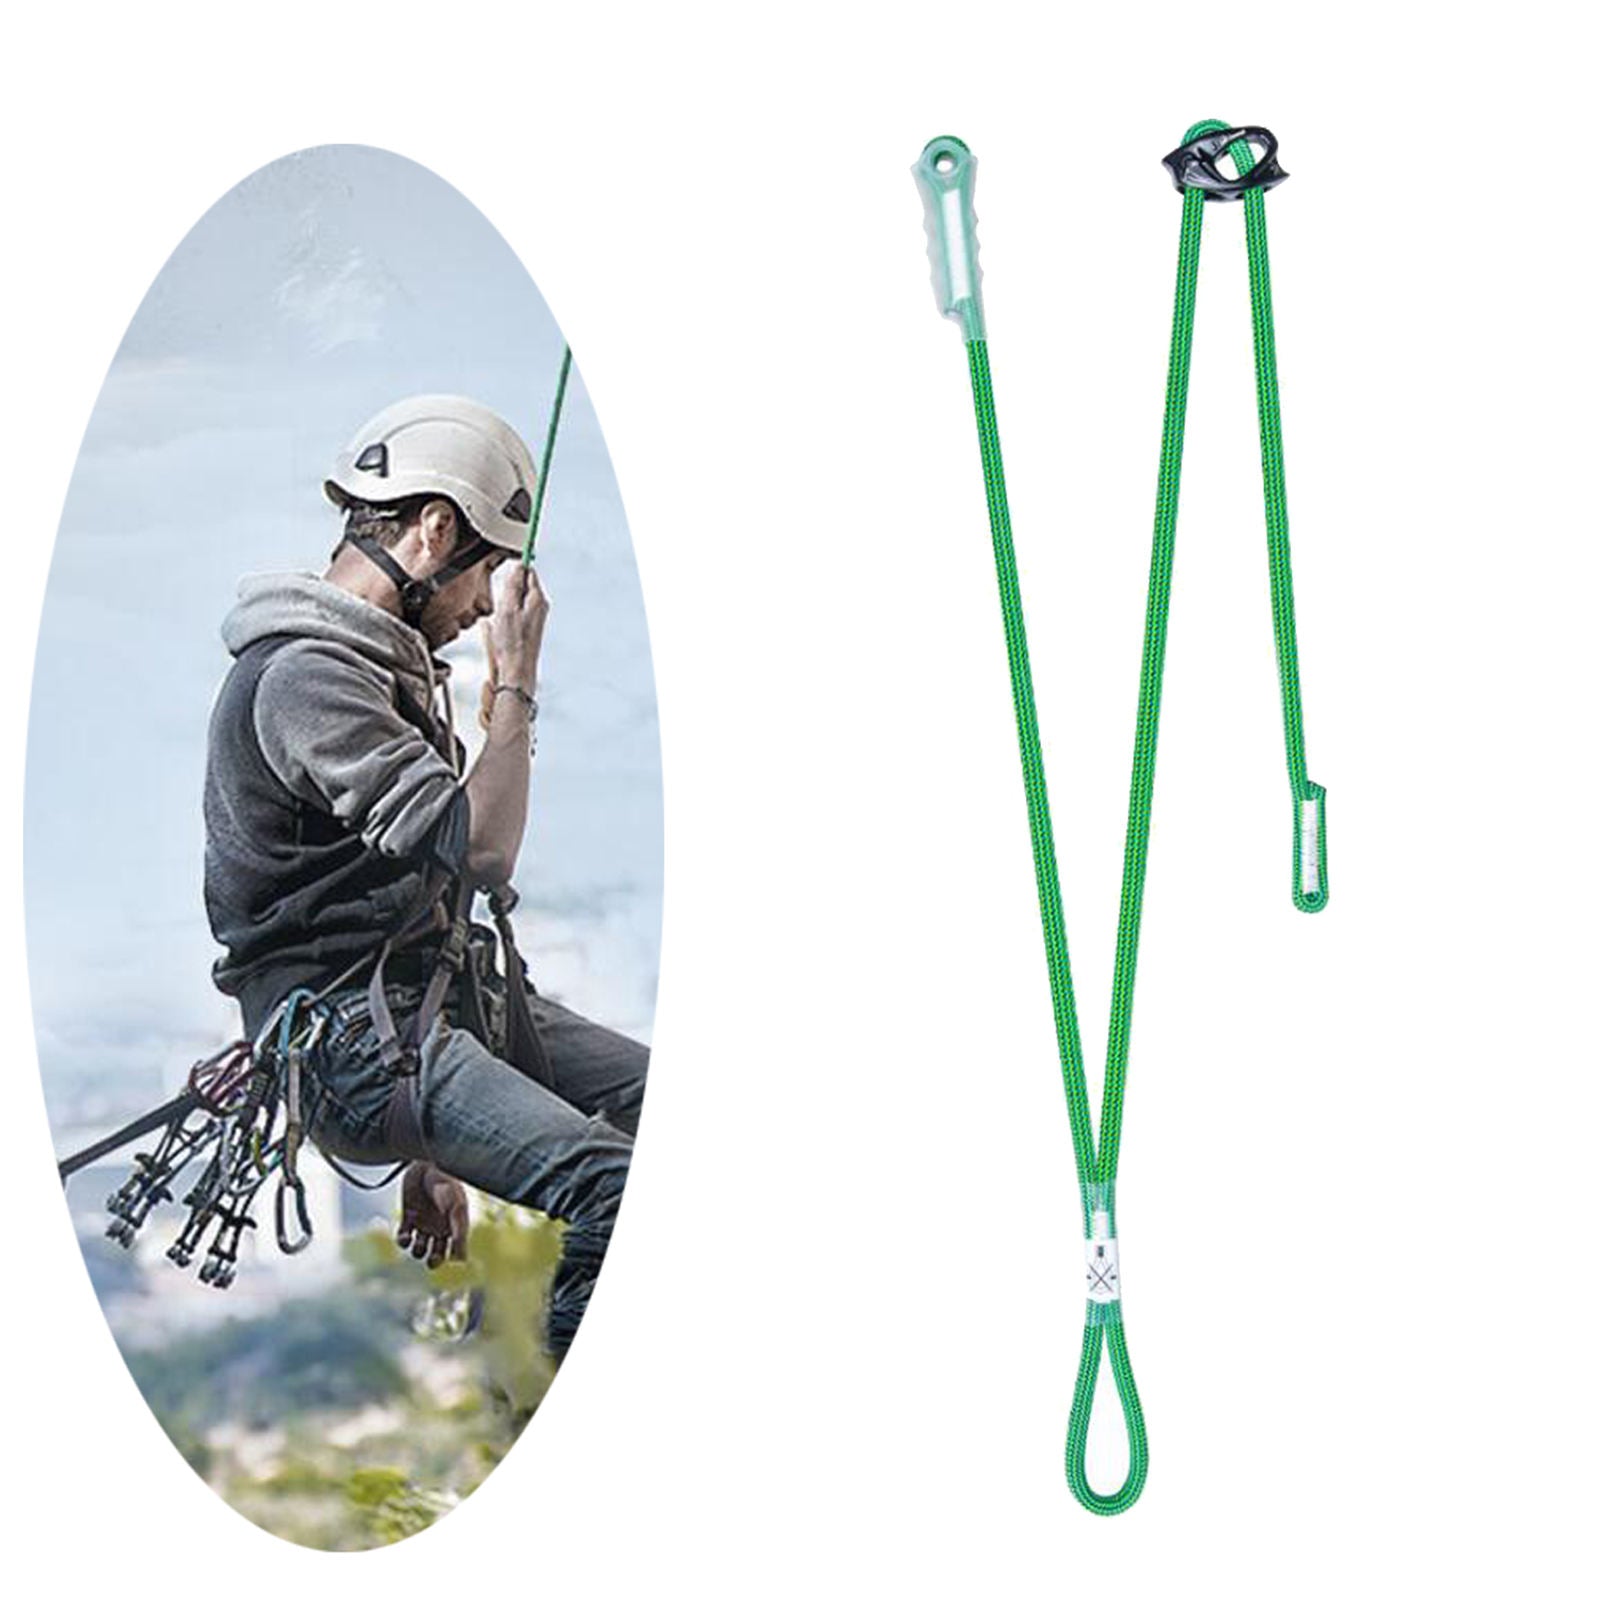 Safety Climbing Positioning Lanyard Durable Harness Anti-fall Descending